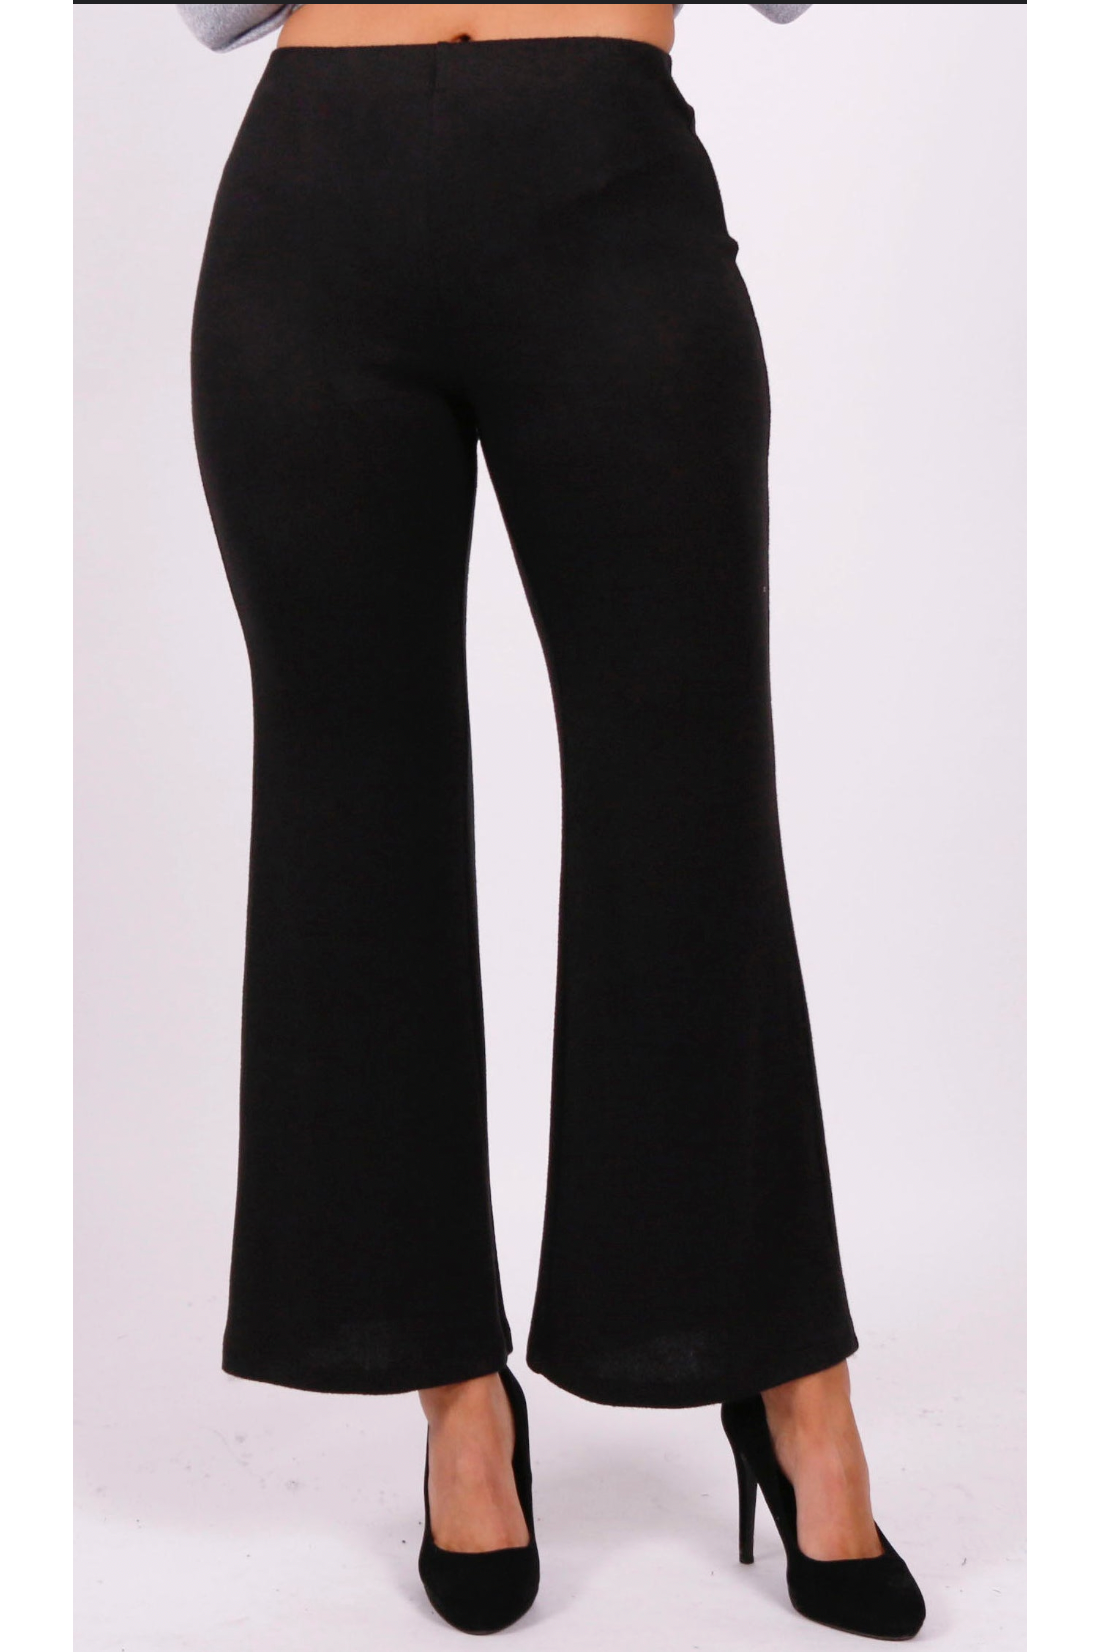 ISCA - Pull-On Pant Flared at the Bottom - 3031-1107 - Black